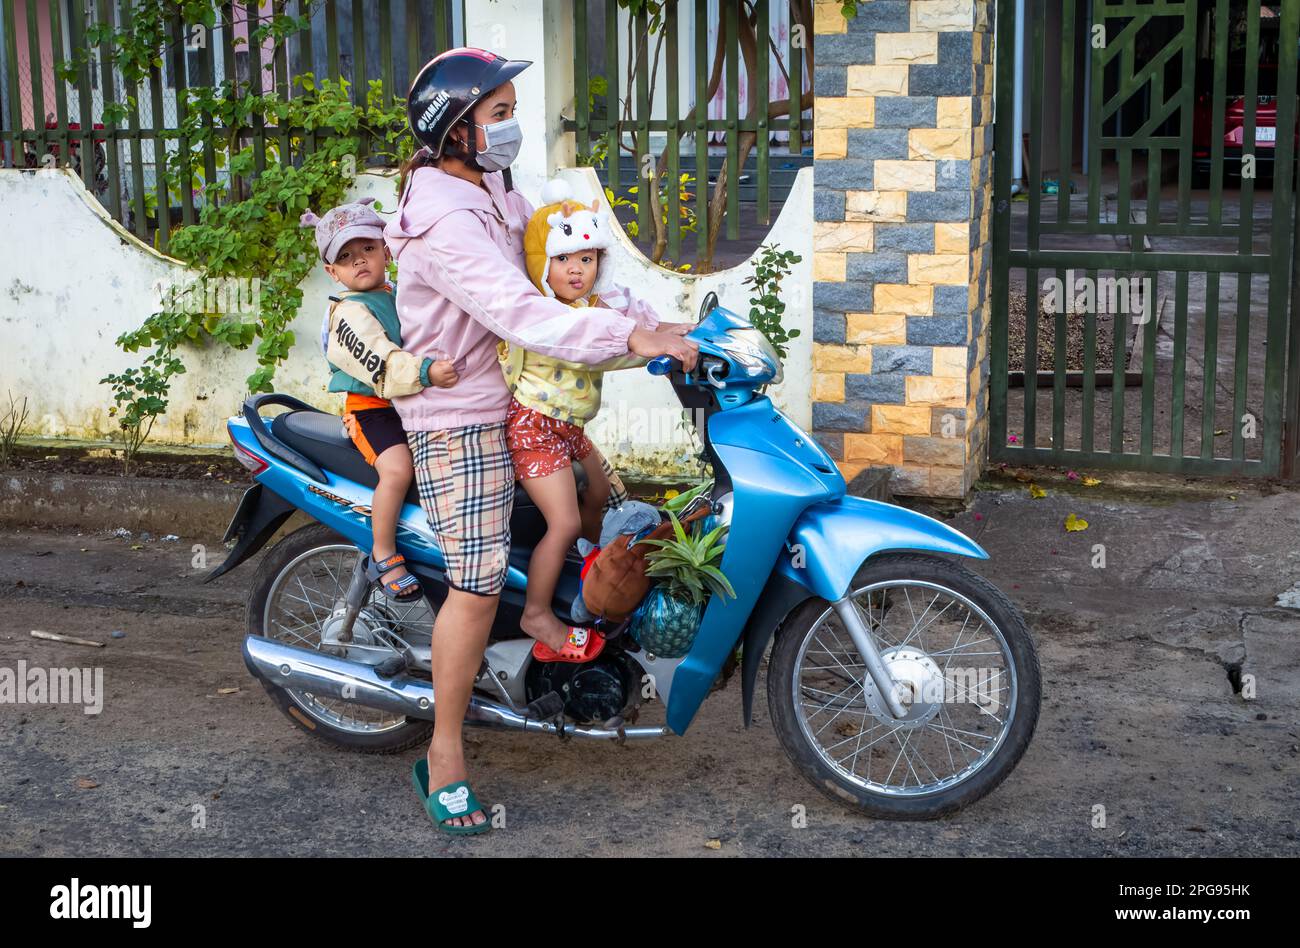 A mother carries her two young chiildren on a Honda Wave motorcycle scooter in Buon Jun, Lien Son, Vietnam. Stock Photo